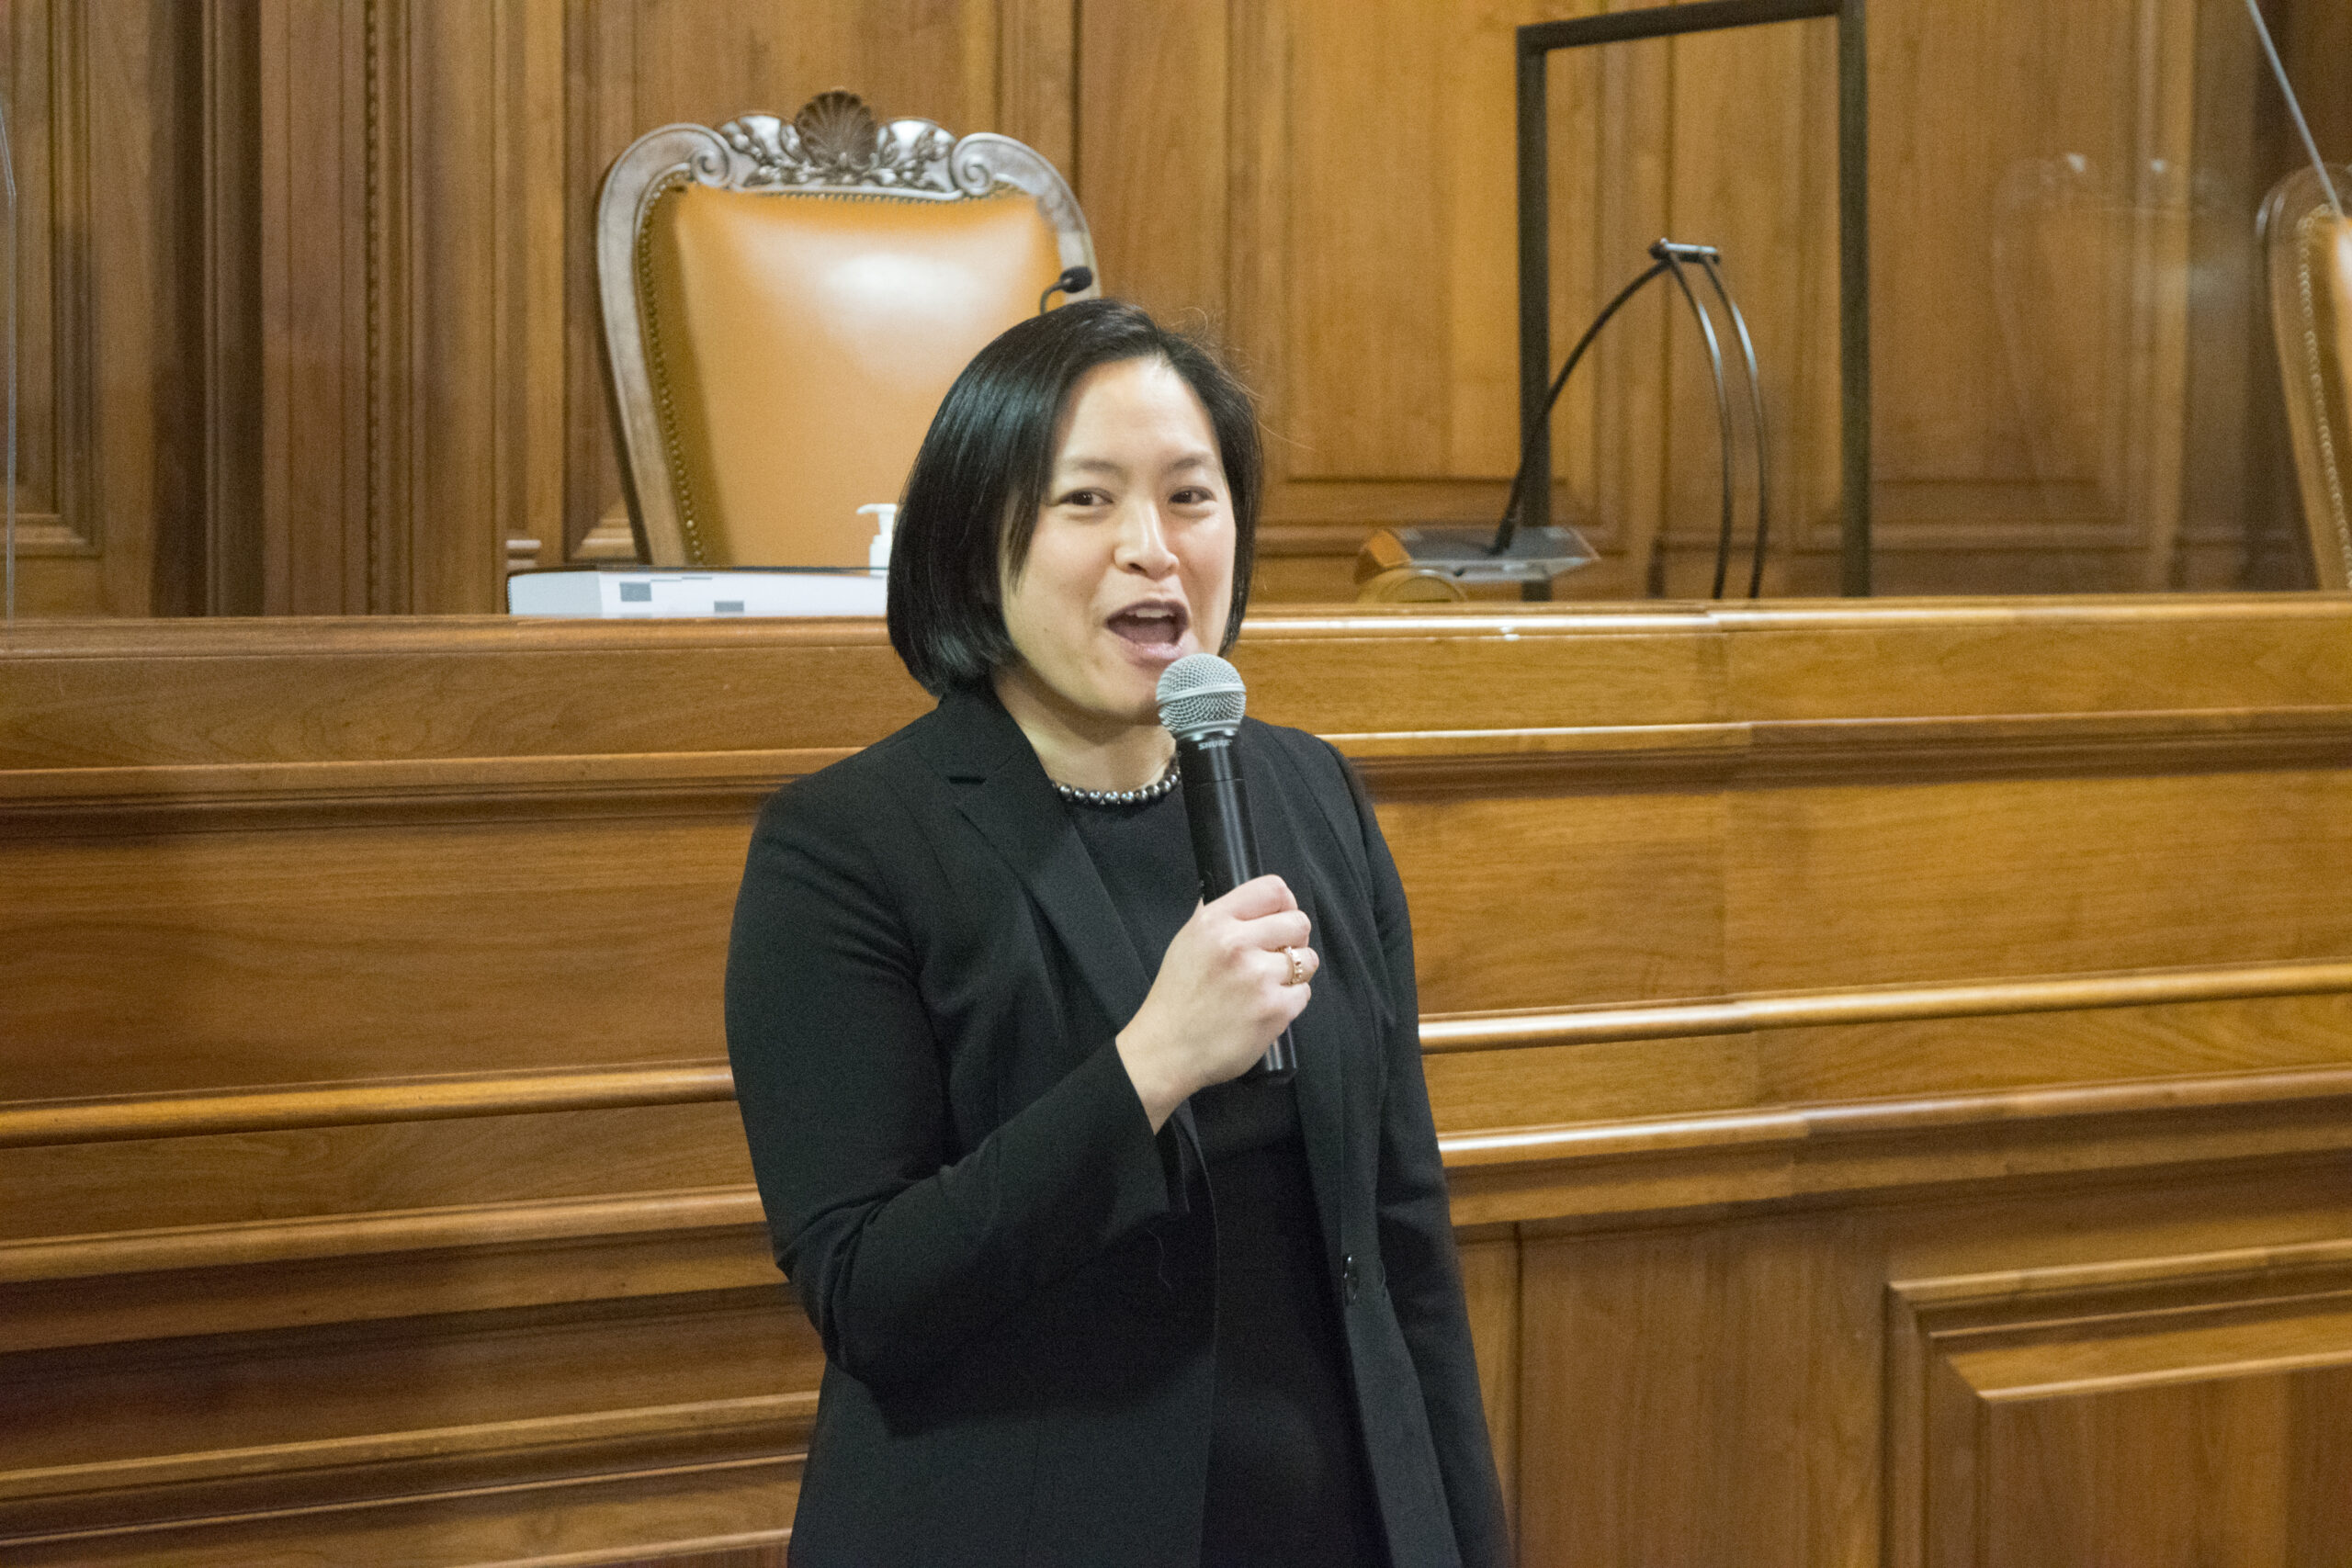 Justice Lillian Wan, the first and only Asian American woman to serve on any of New York’s Appellate Division courts, navigated her way from family law to appellate adjudication while breaking barriers and confronting biases. Her journey is detailed in a recent Diversity Dialogue podcast episode.